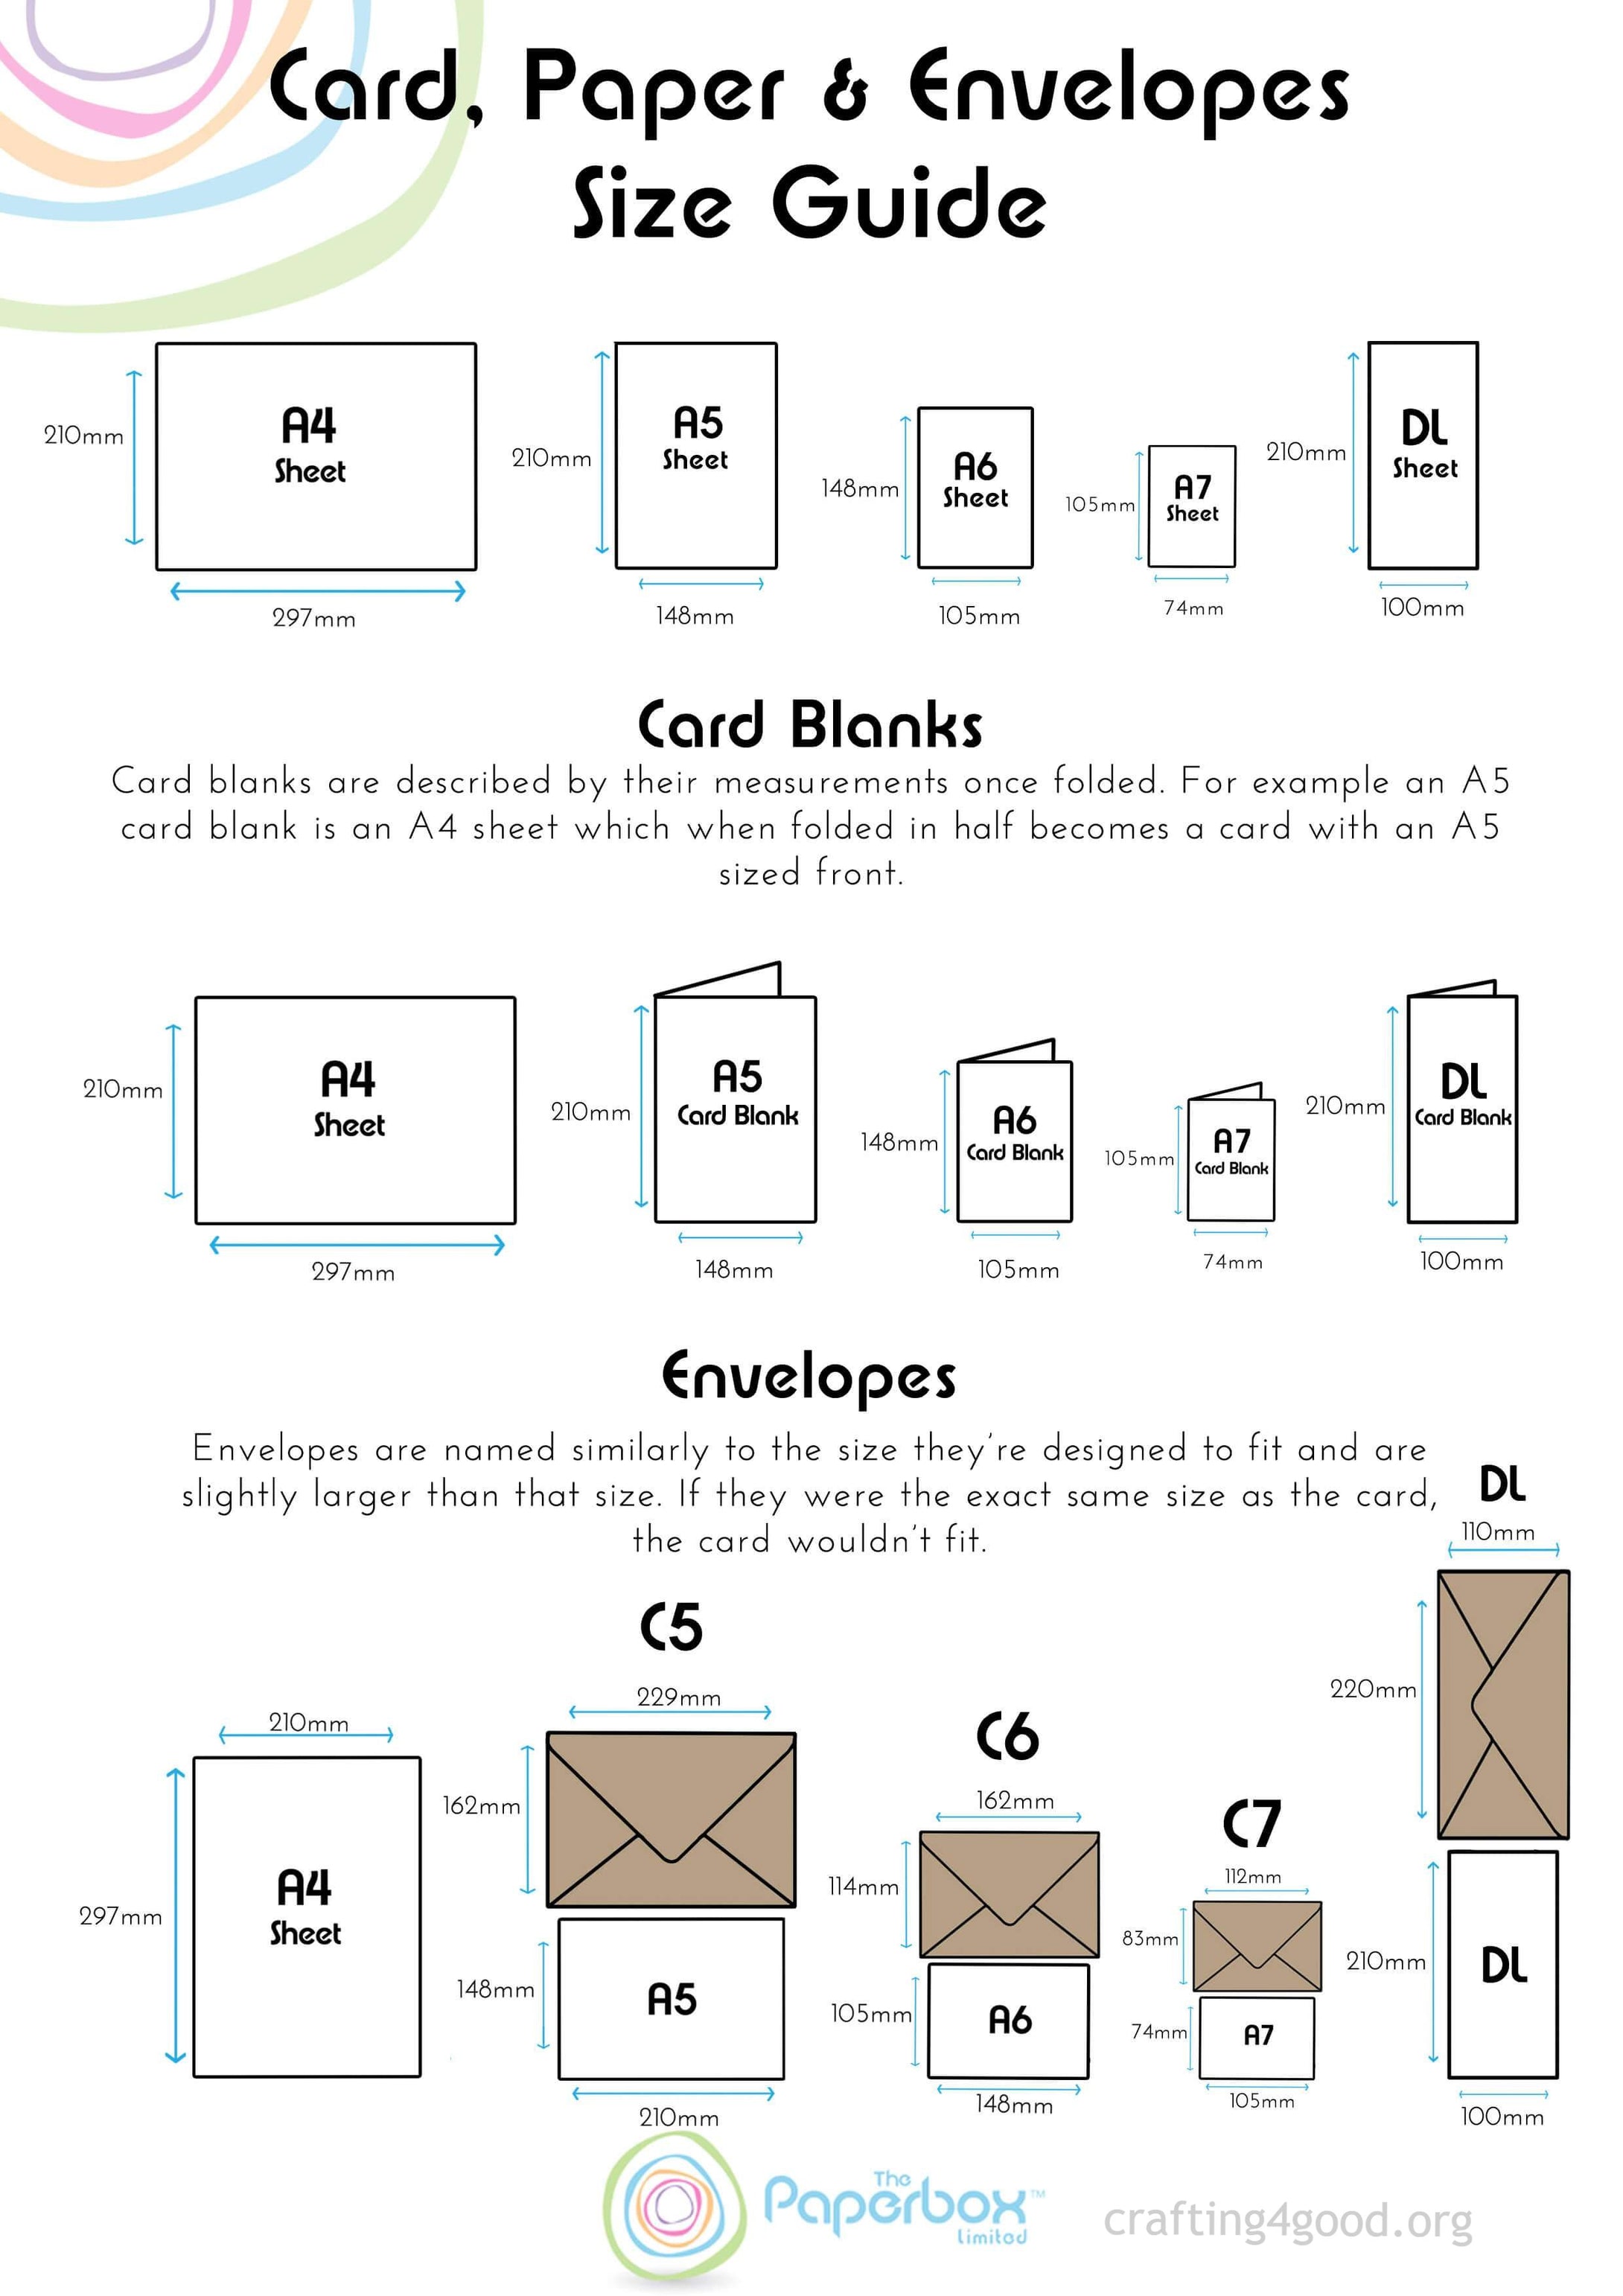 standard envelope sizes for greeting cards